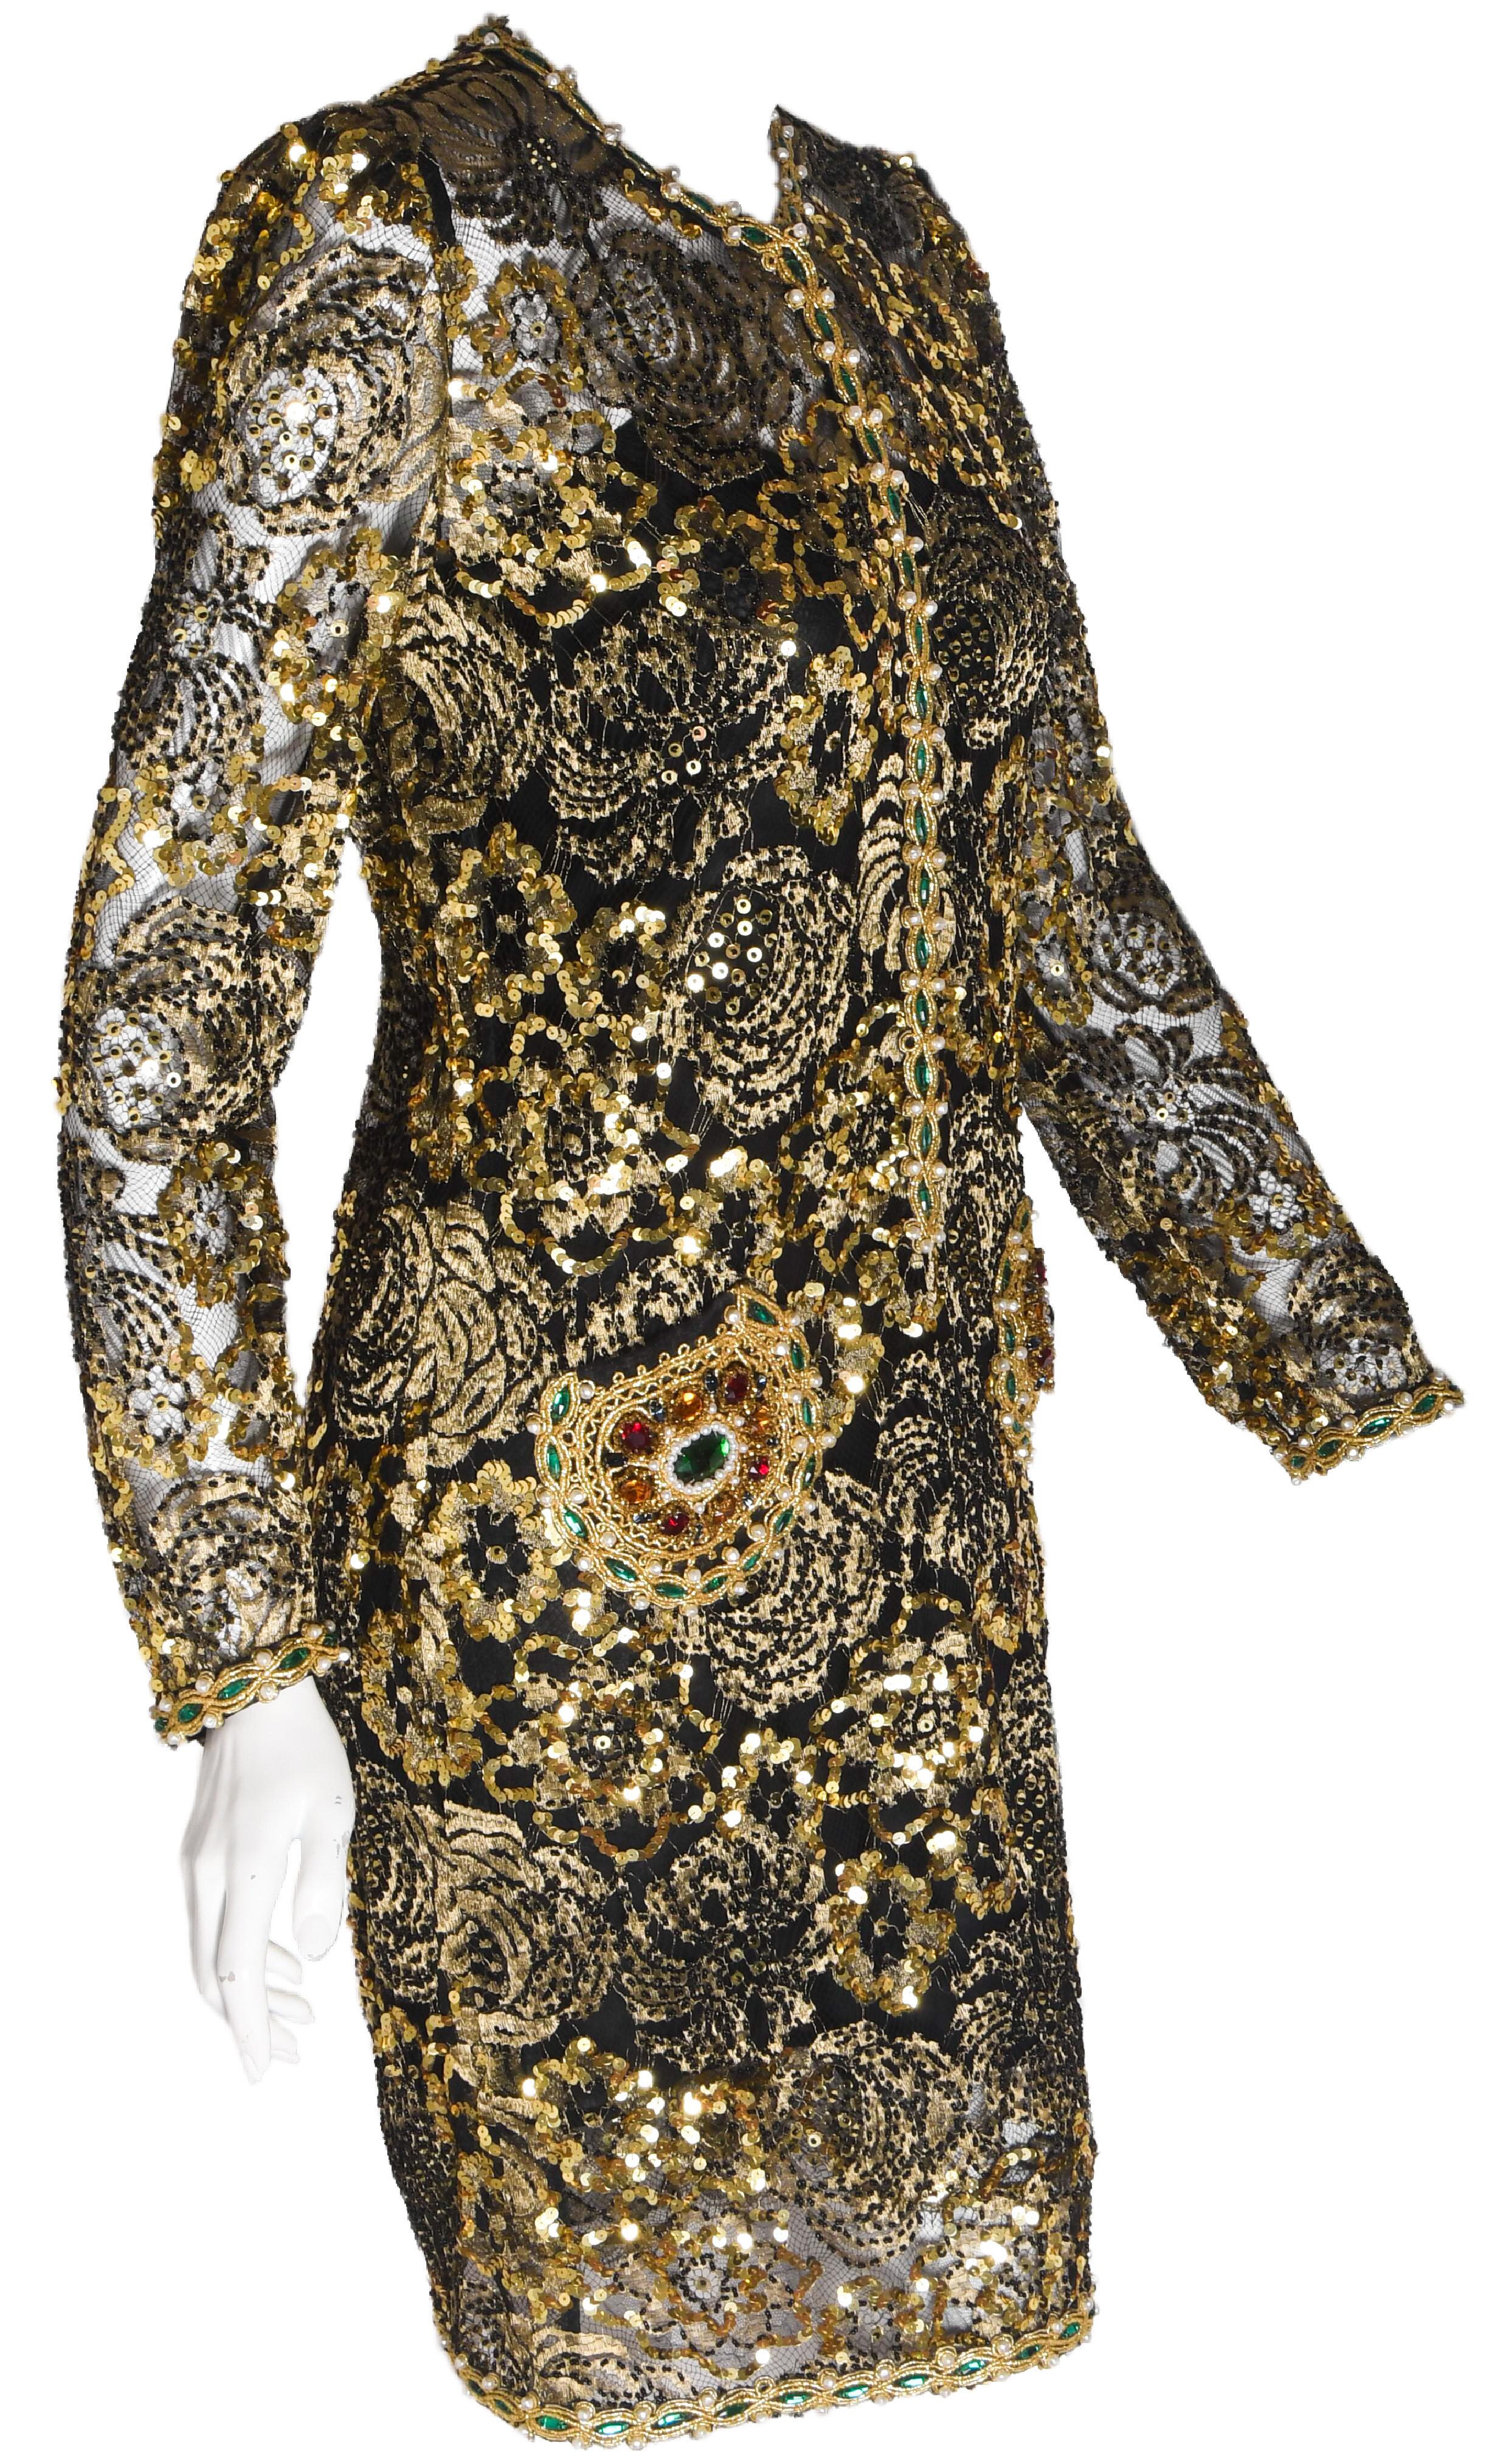 Adolfo 1980's vintage beaded gold lace and gold tone lace dress features faux pearls, beads and sequins in a floral pattern allover.  Look closely, dress has beaded gold thread trim, faux pearls and emerald green tone beads around neckline, cuffs,